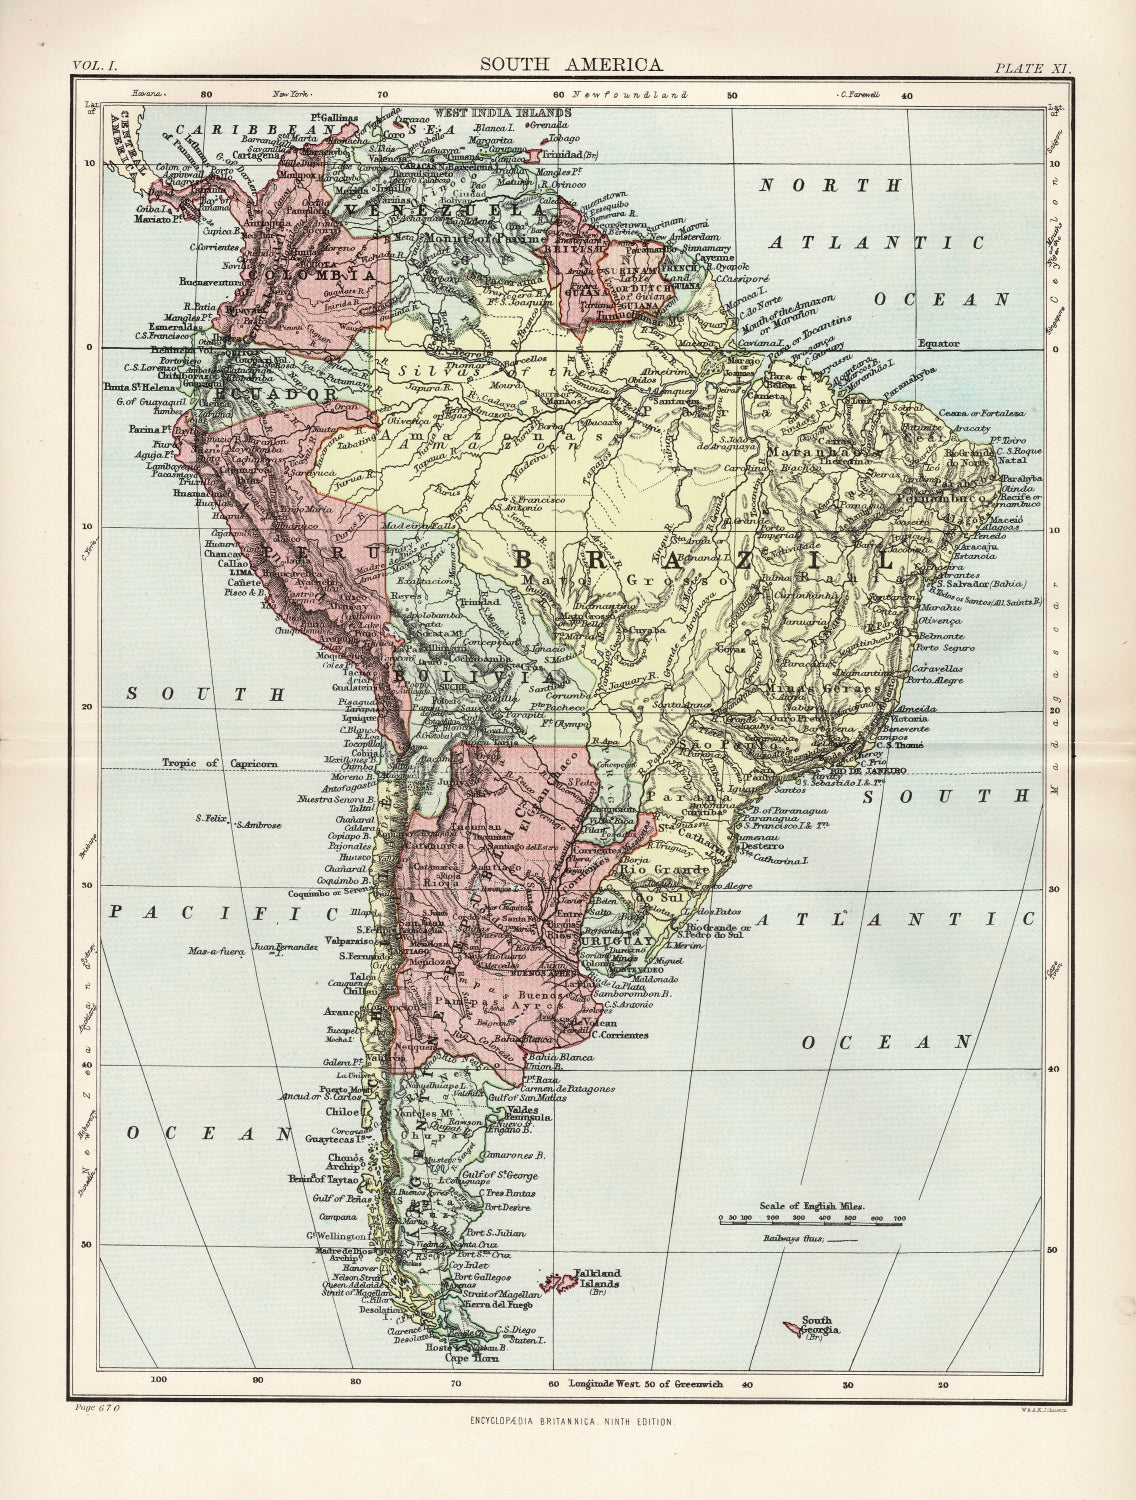 South America antique map from Encyclopaedia Britannica 1889